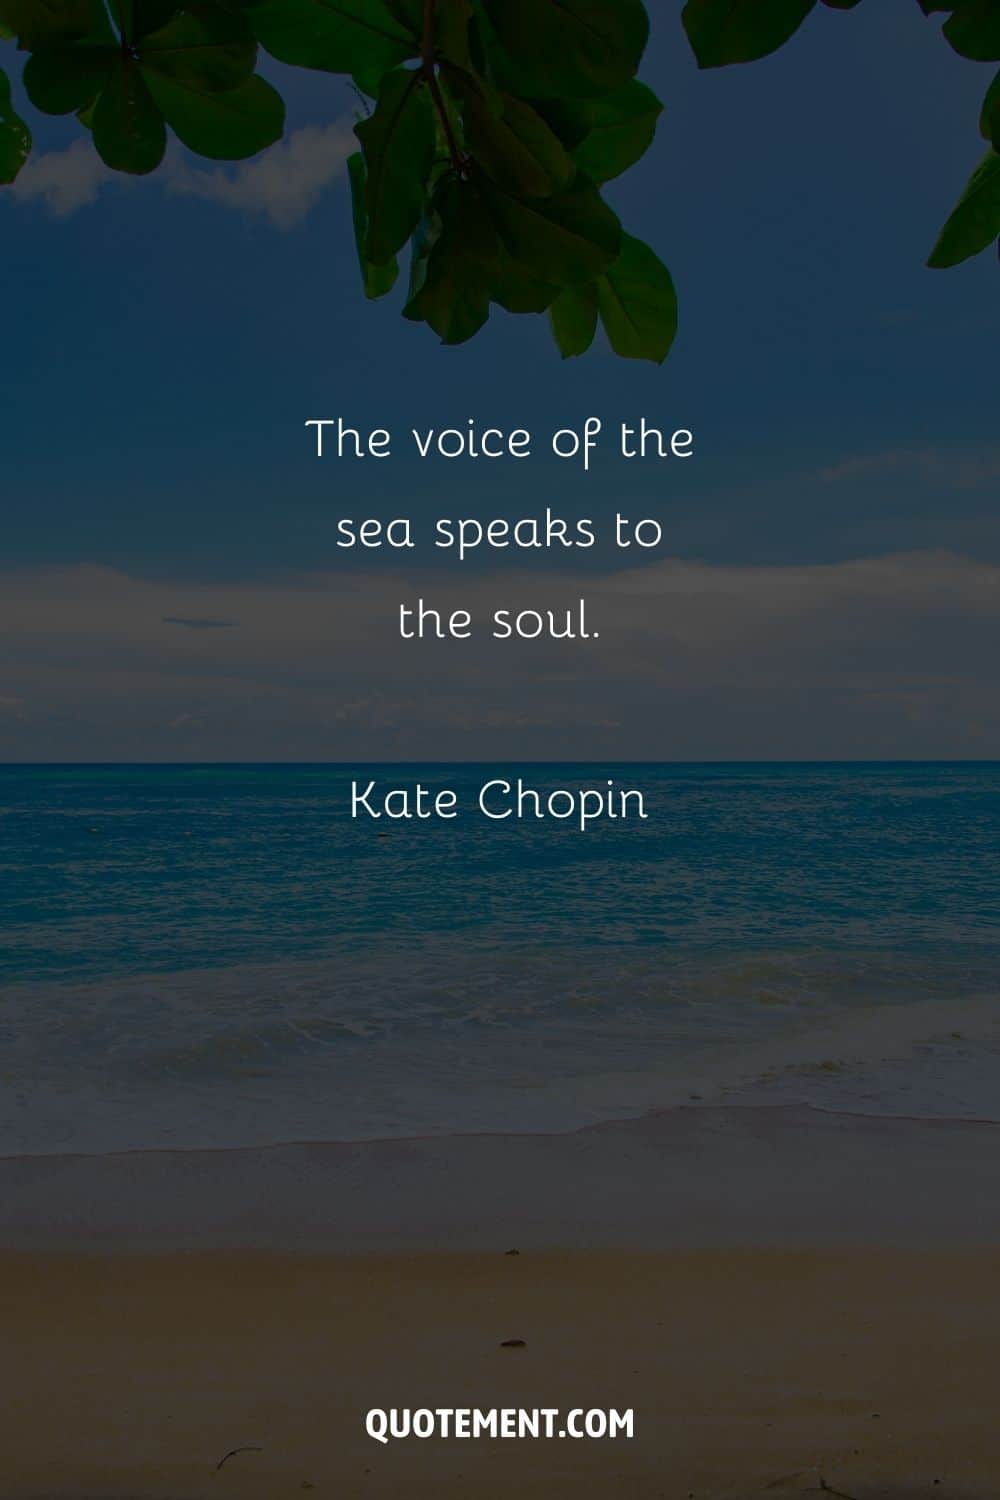 The voice of the sea speaks to the soul. – Kate Chopin